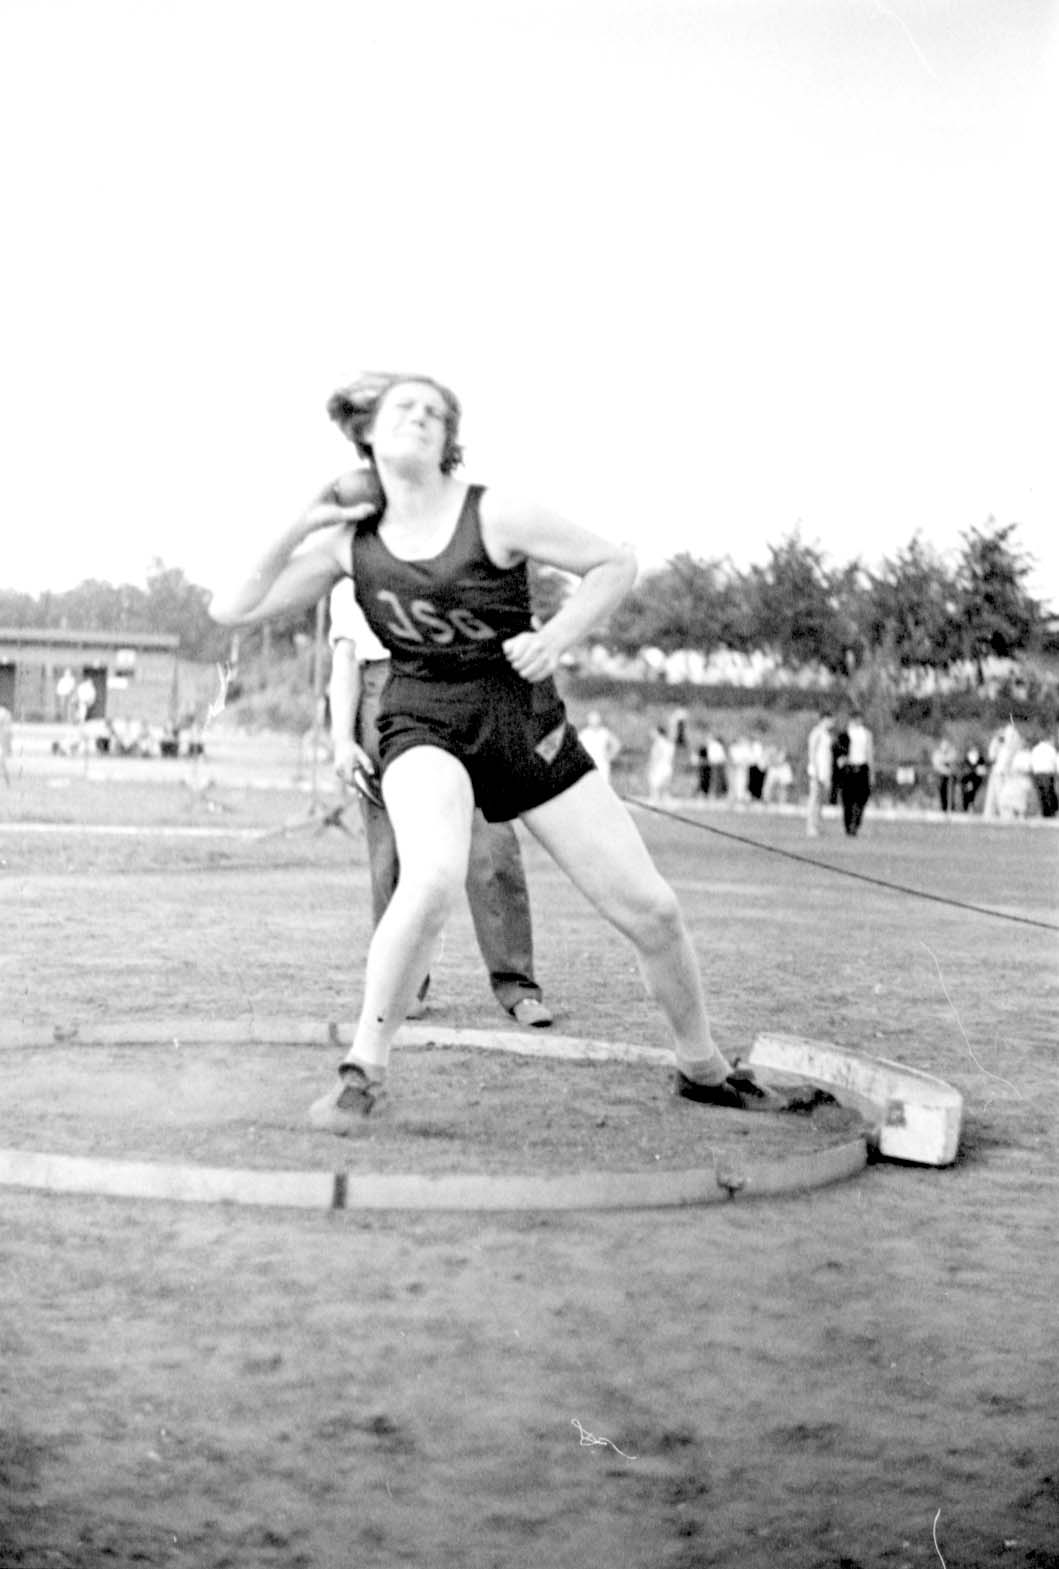 Berlin, Germany, 04/07/1937, Ingeborg Mello, winner of the shot-put competition at a Jewish sports tournament